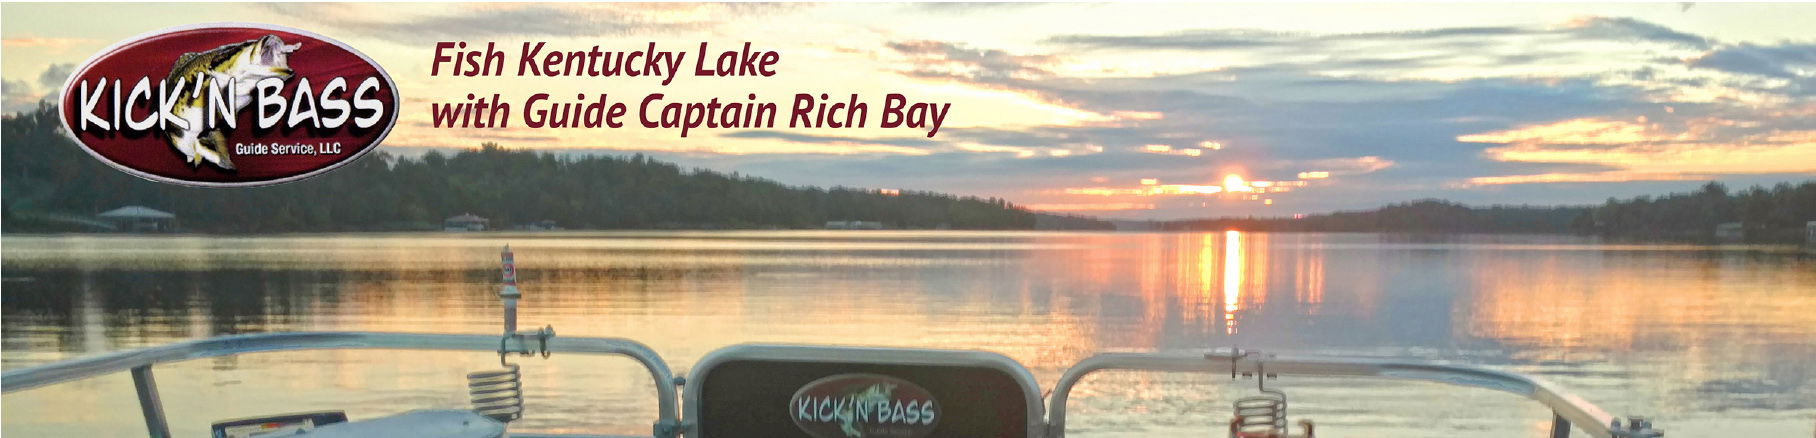 Your Kick'n Bass Fishing Report for April 18, 2018